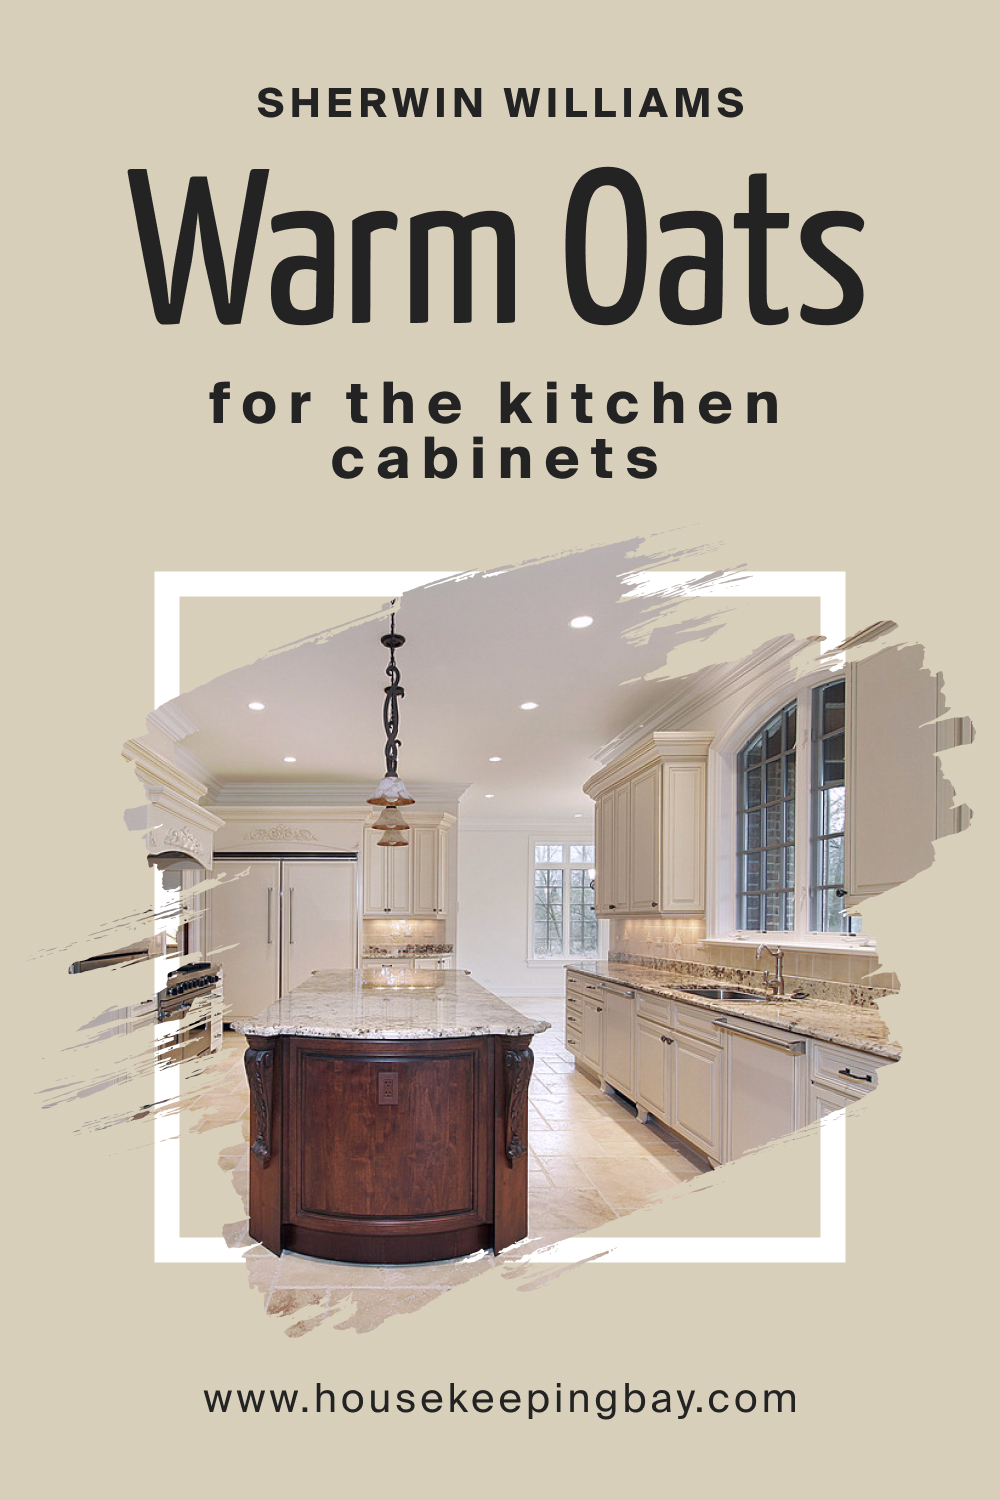 Sherwin Williams. SW 9511 Warm Oats For the Kitchen Cabinets